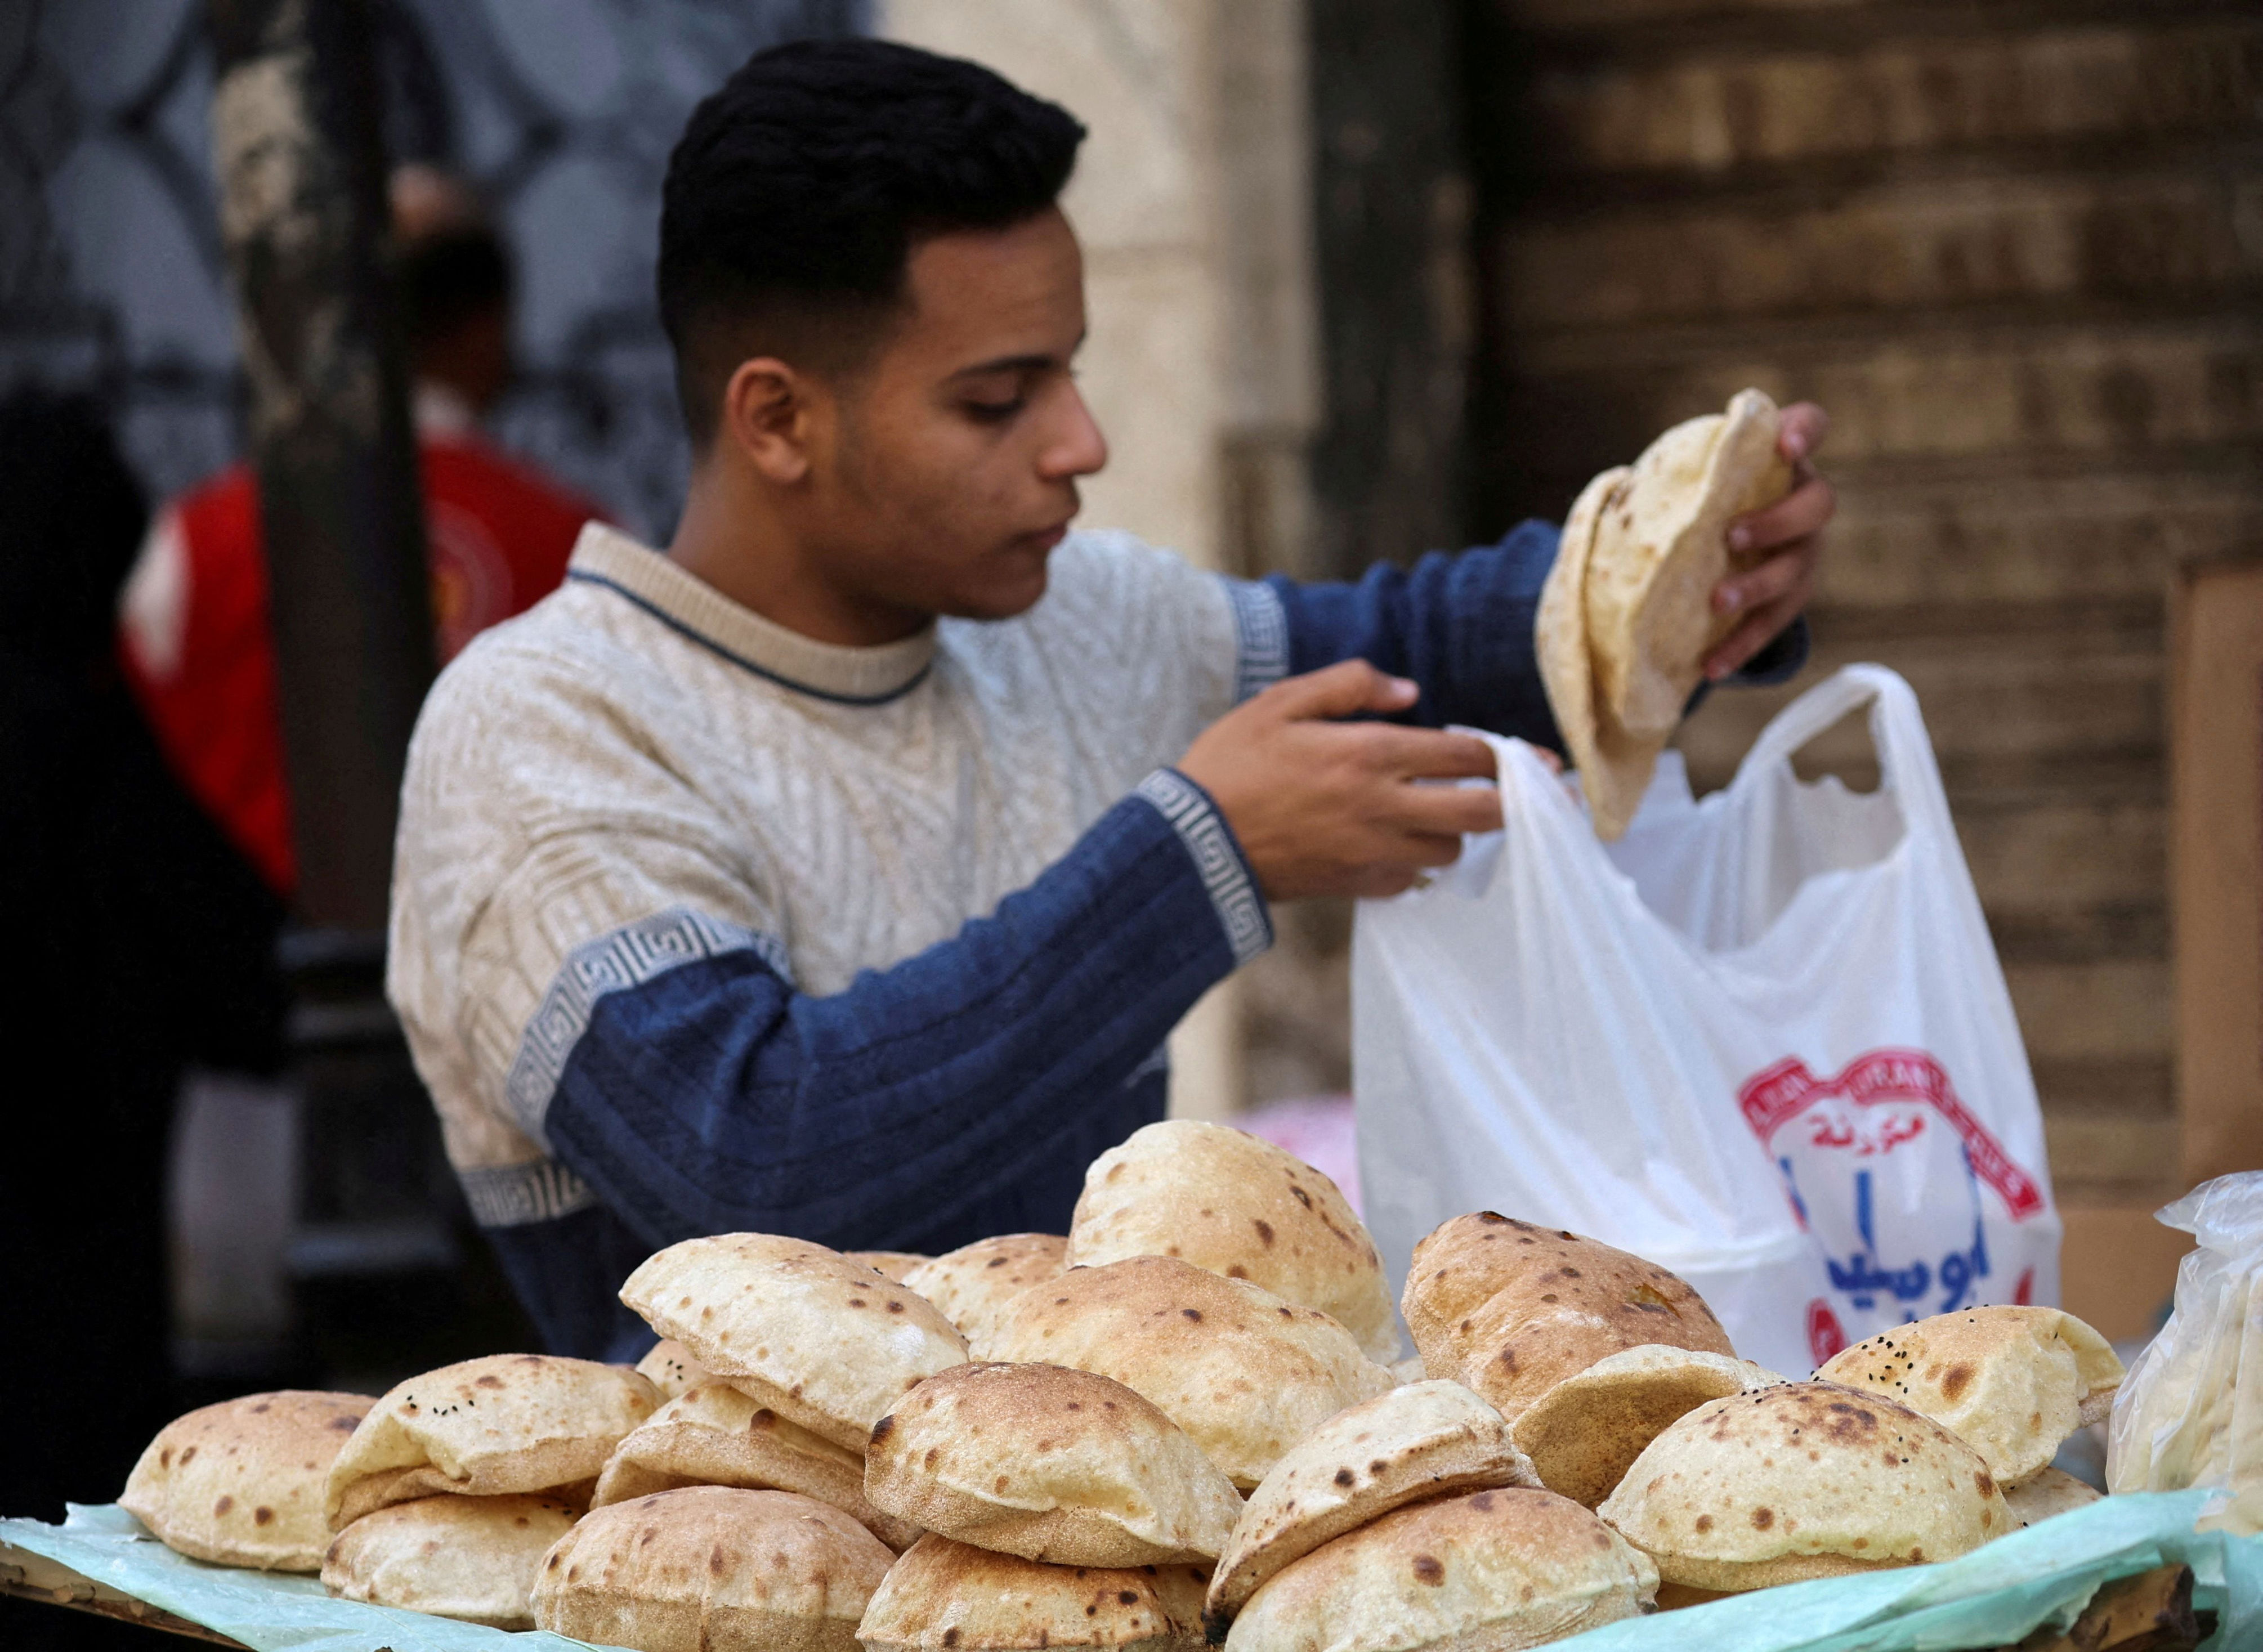 flour cost reduction fails to lower bread prices in egypt